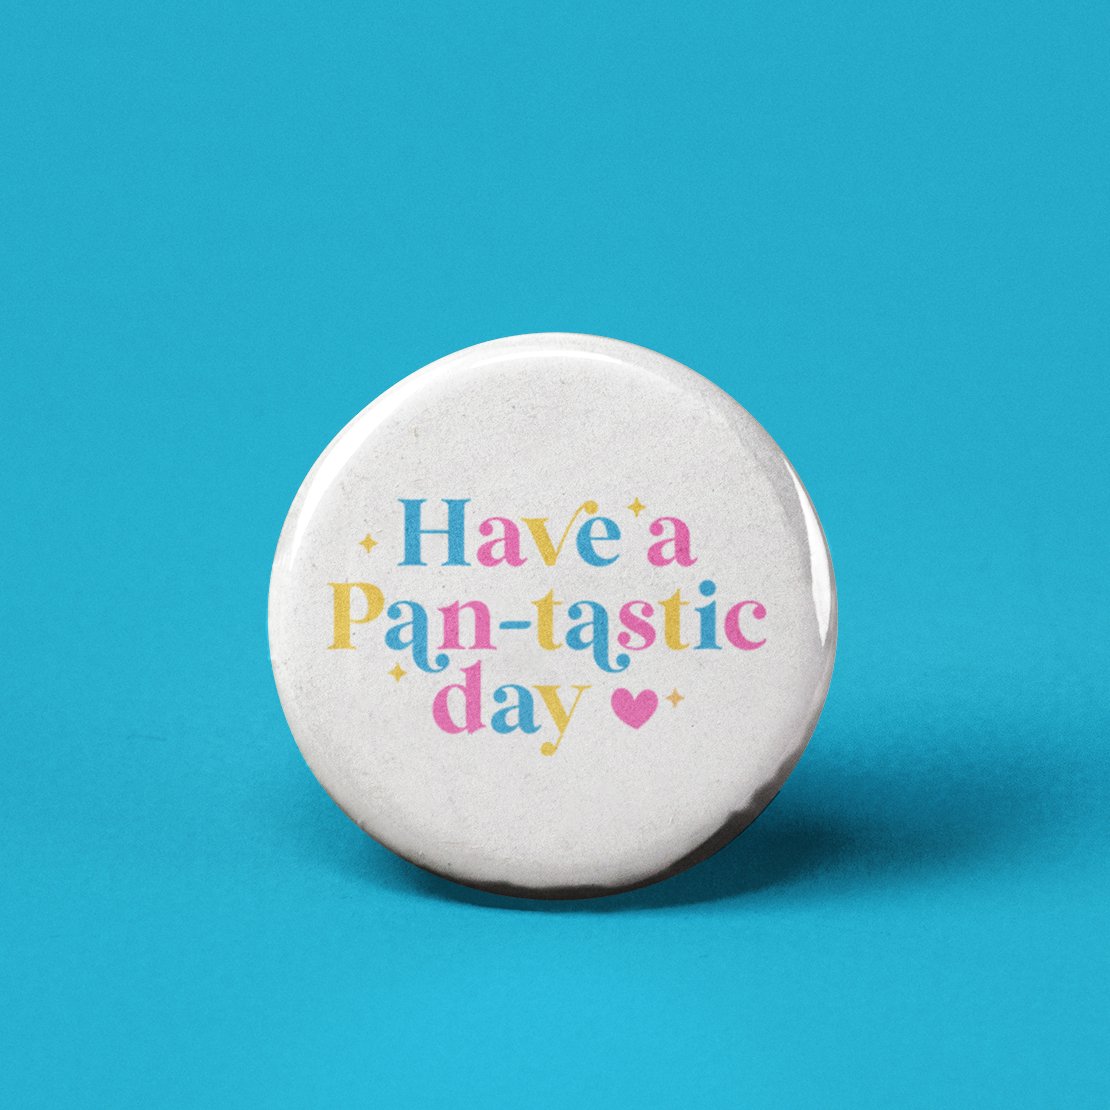 Have a Pan-tastic Day Pansexual Pinback Button - Spiral Circle